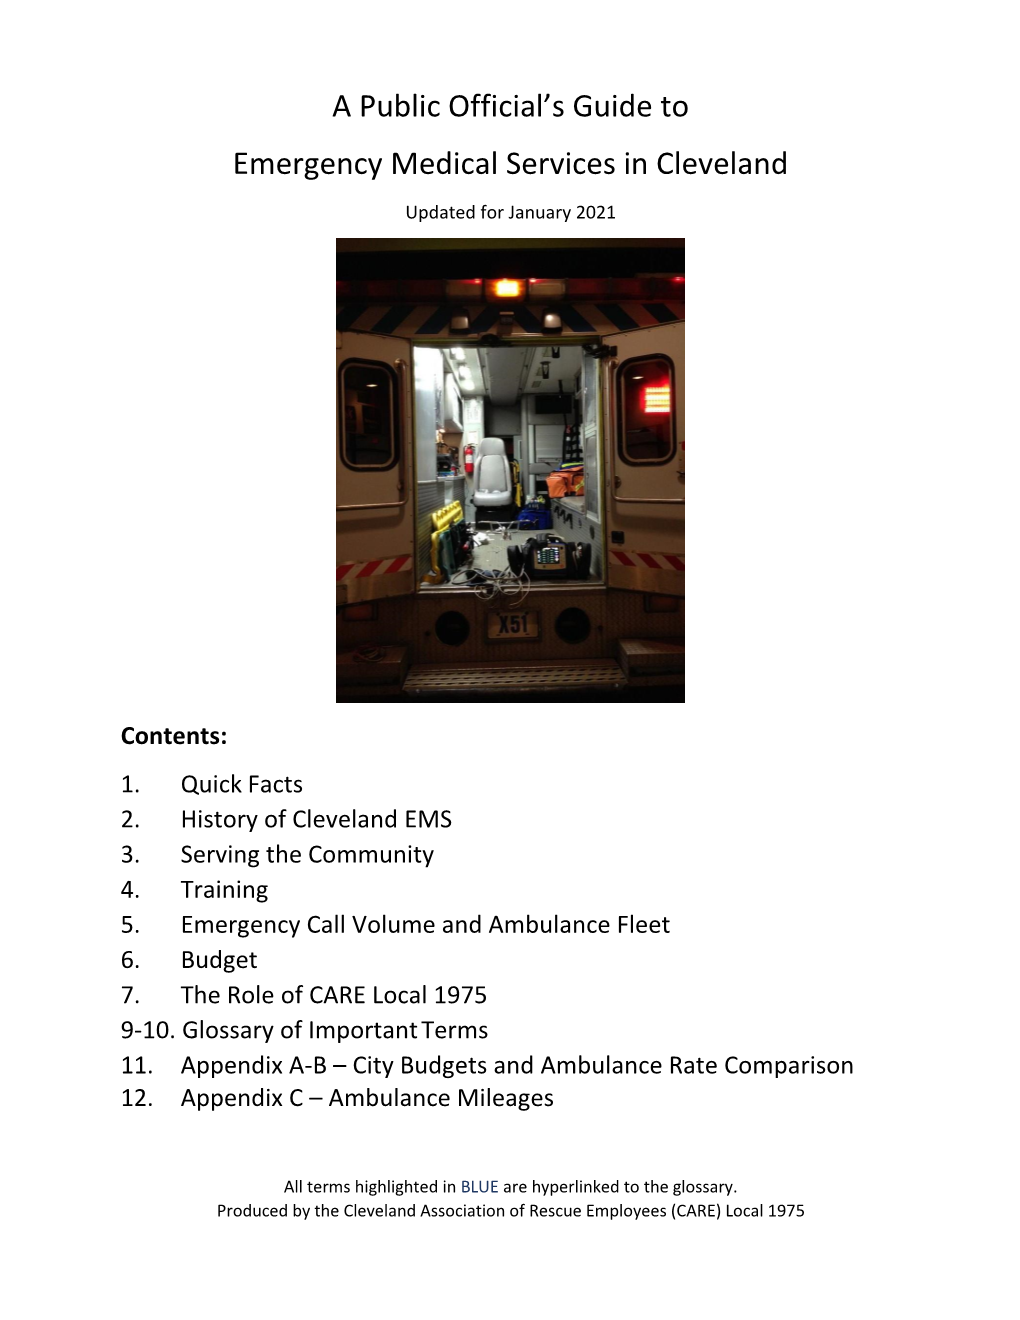 A Public Official's Guide to Emergency Medical Services in Cleveland